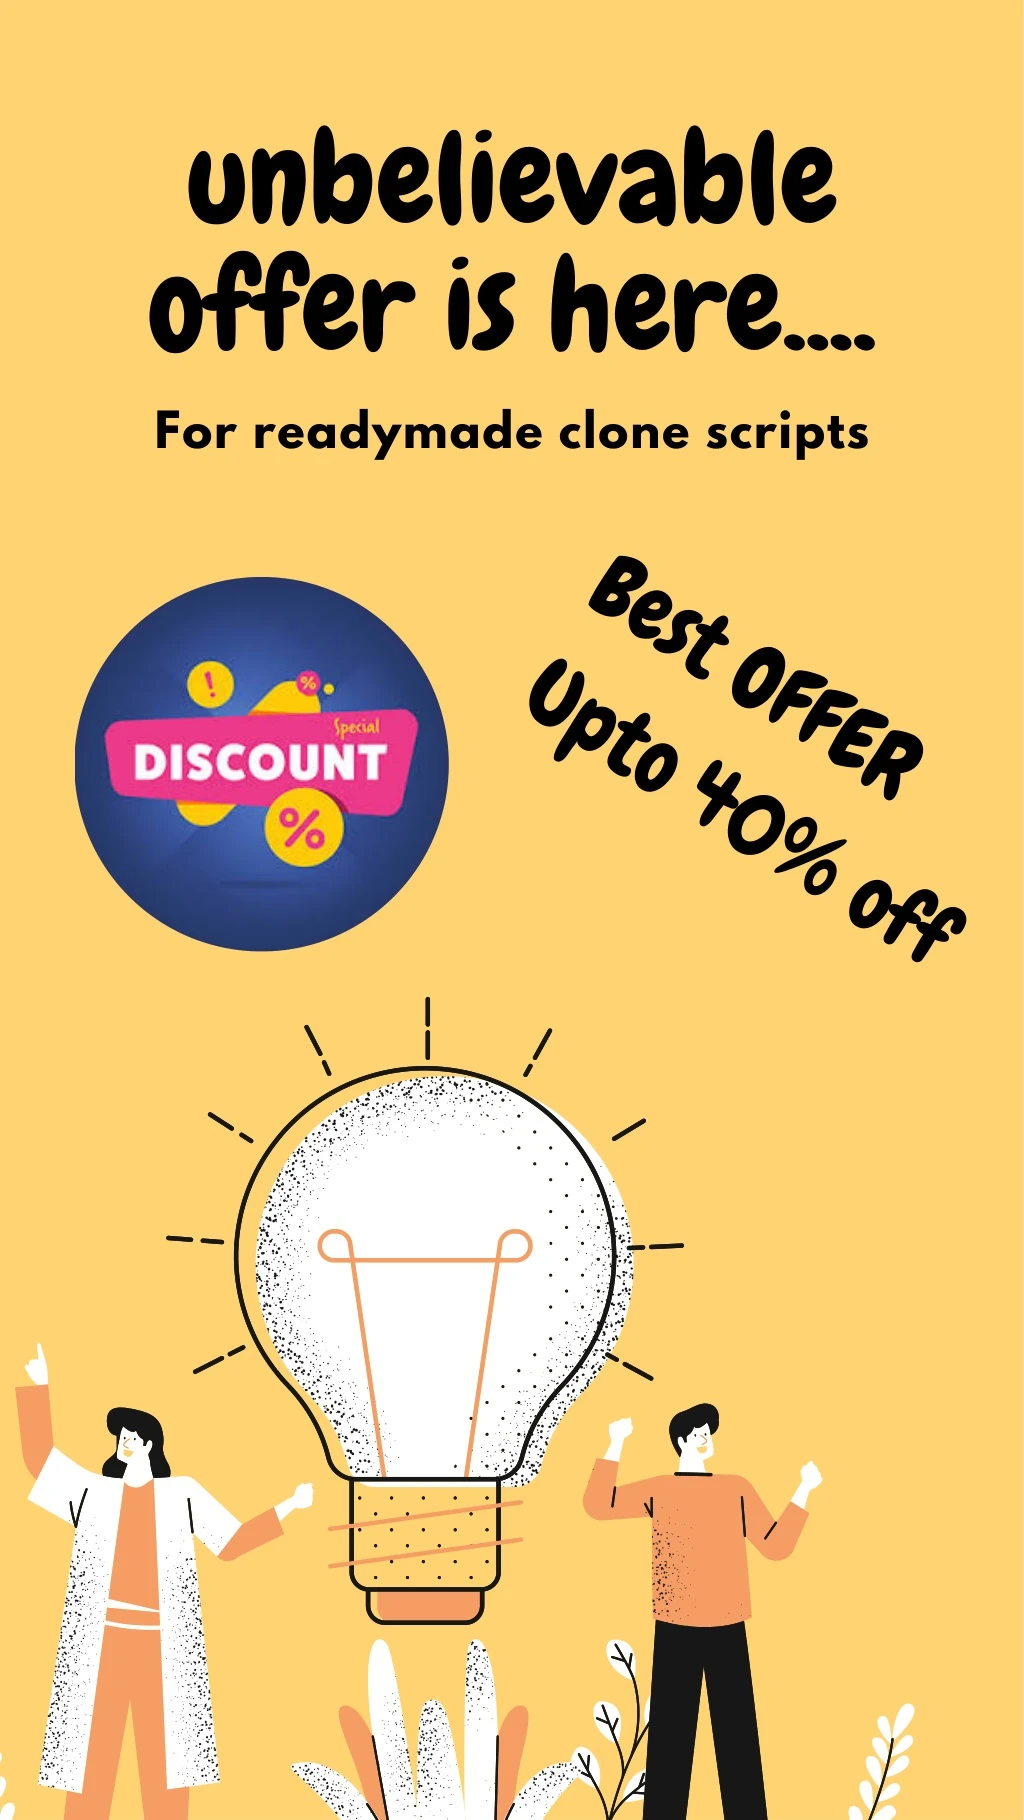 unbelievable offer is here for readymade clone